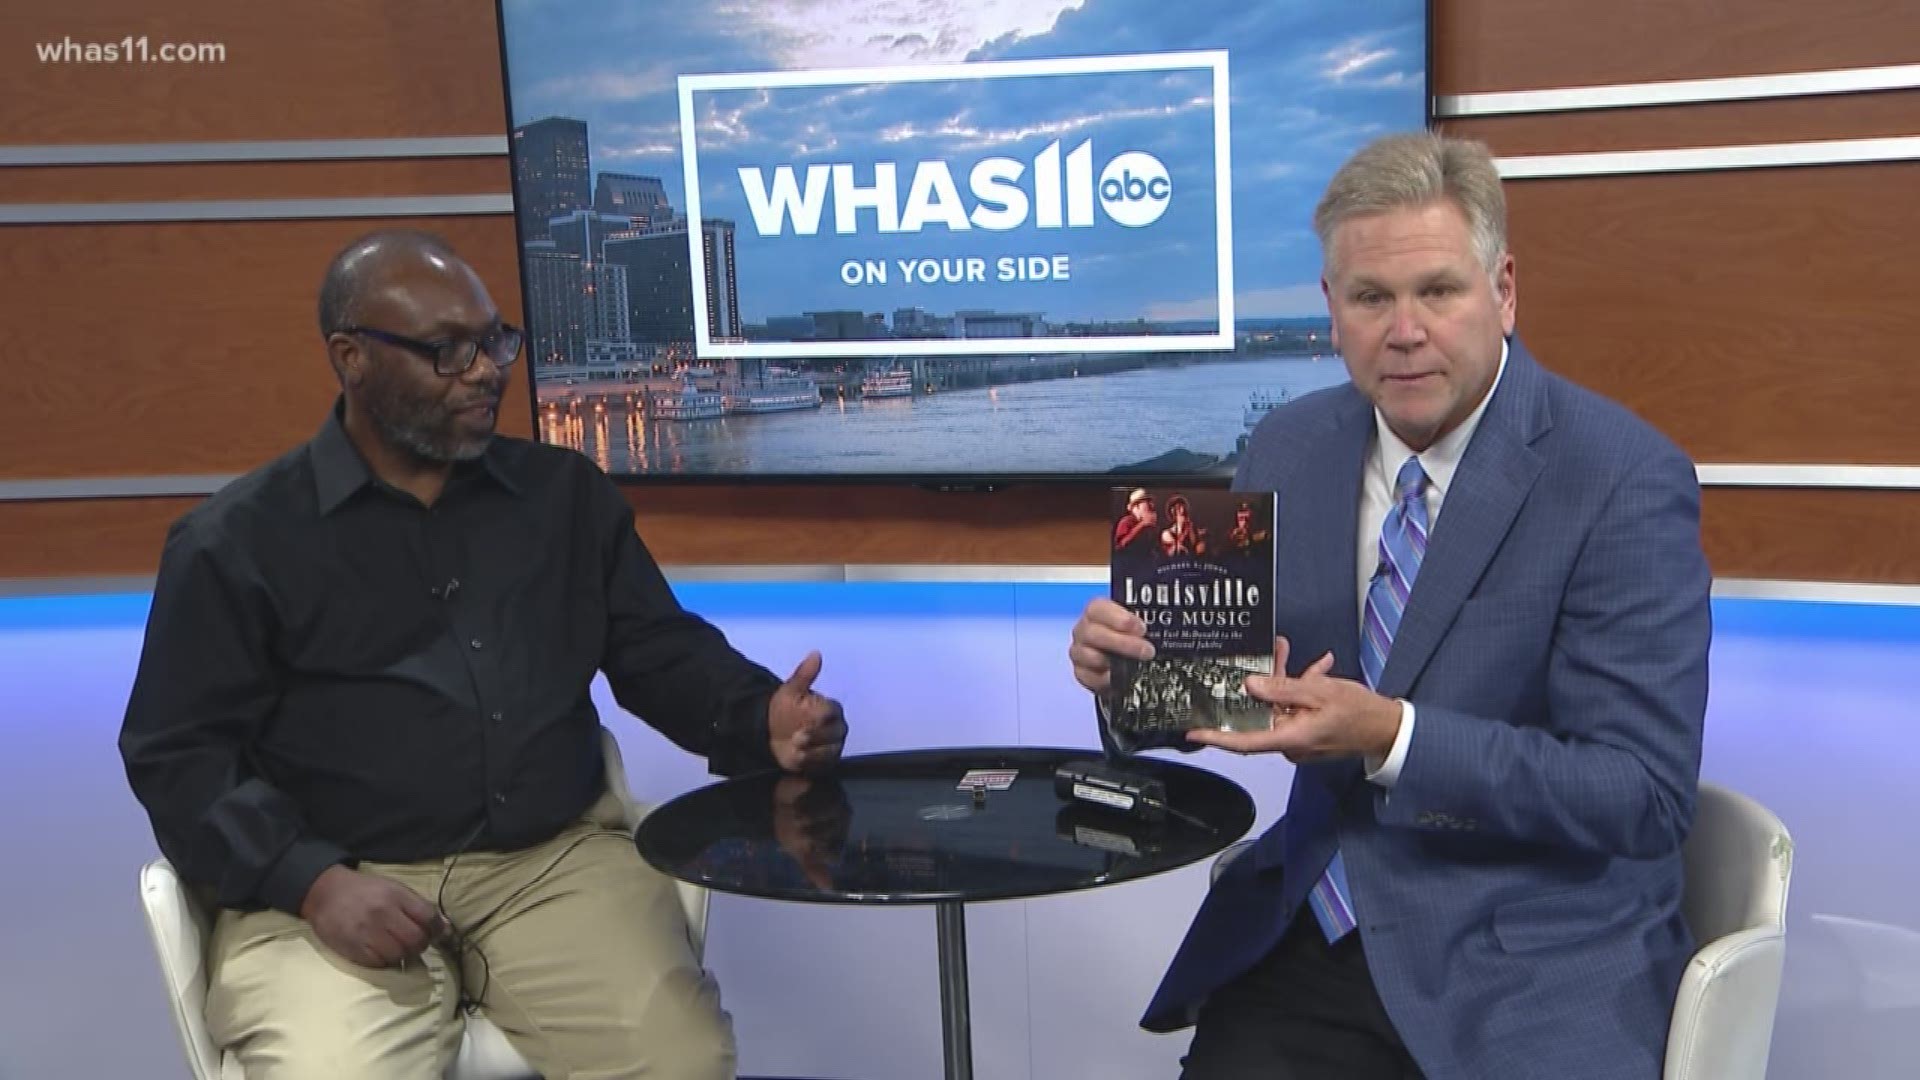 Author and historian Michael Jones will be talking about jug bands at this August event. He discusses the event with WHAS11's Doug Proffitt.